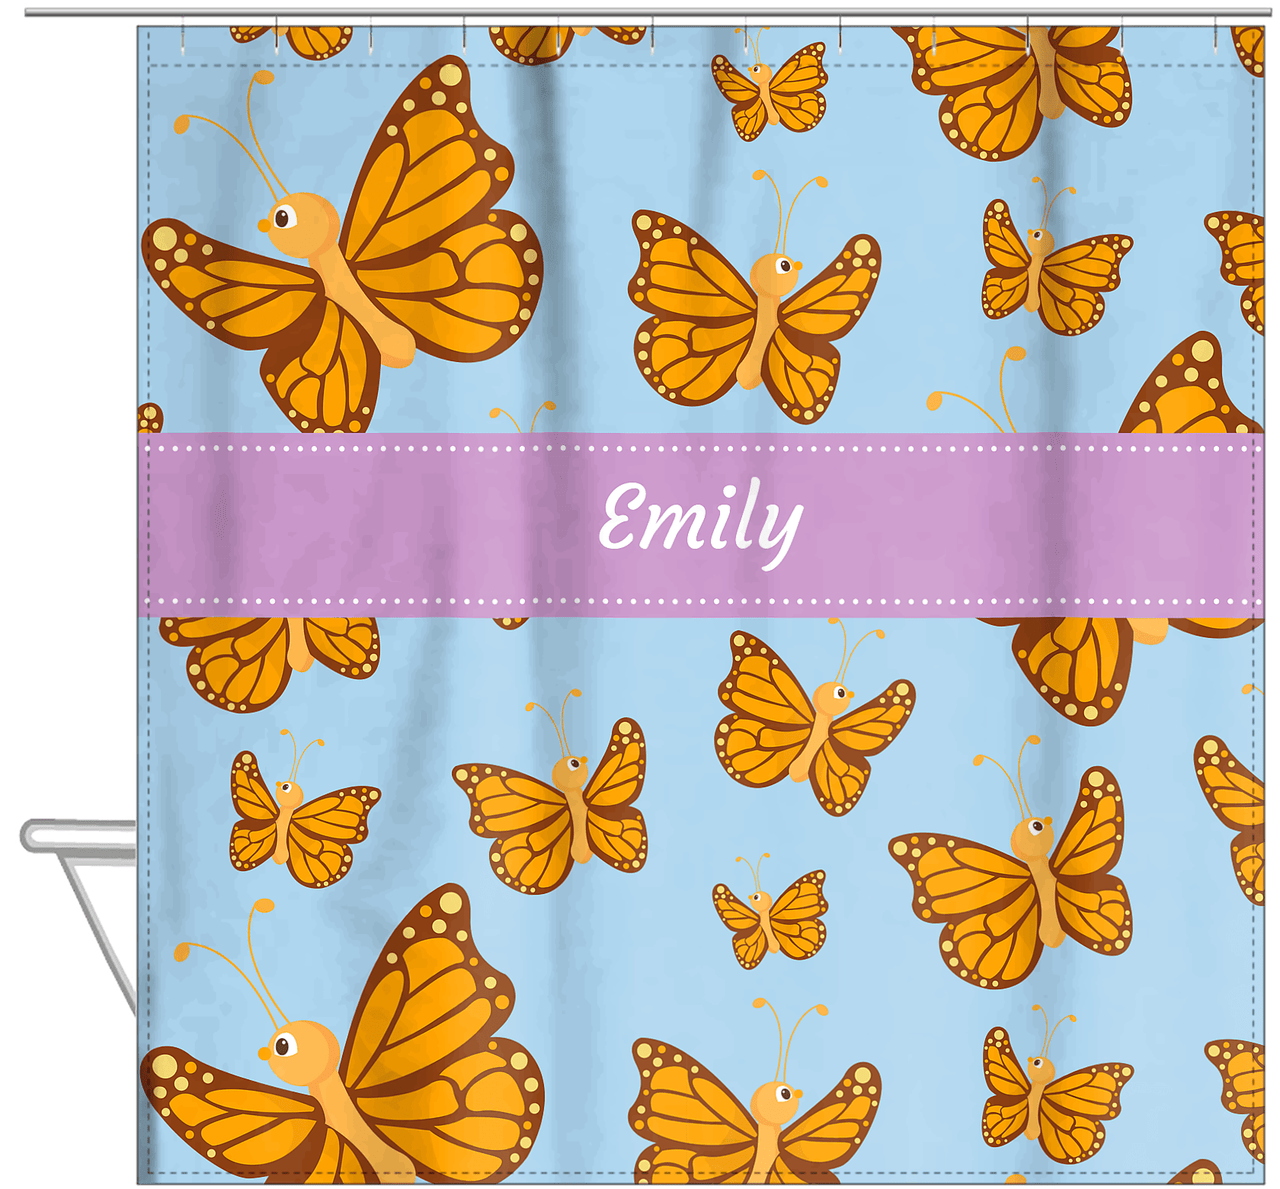 Personalized Butterfly Shower Curtain I - Blue Background - Orange Butterflies - Hanging View